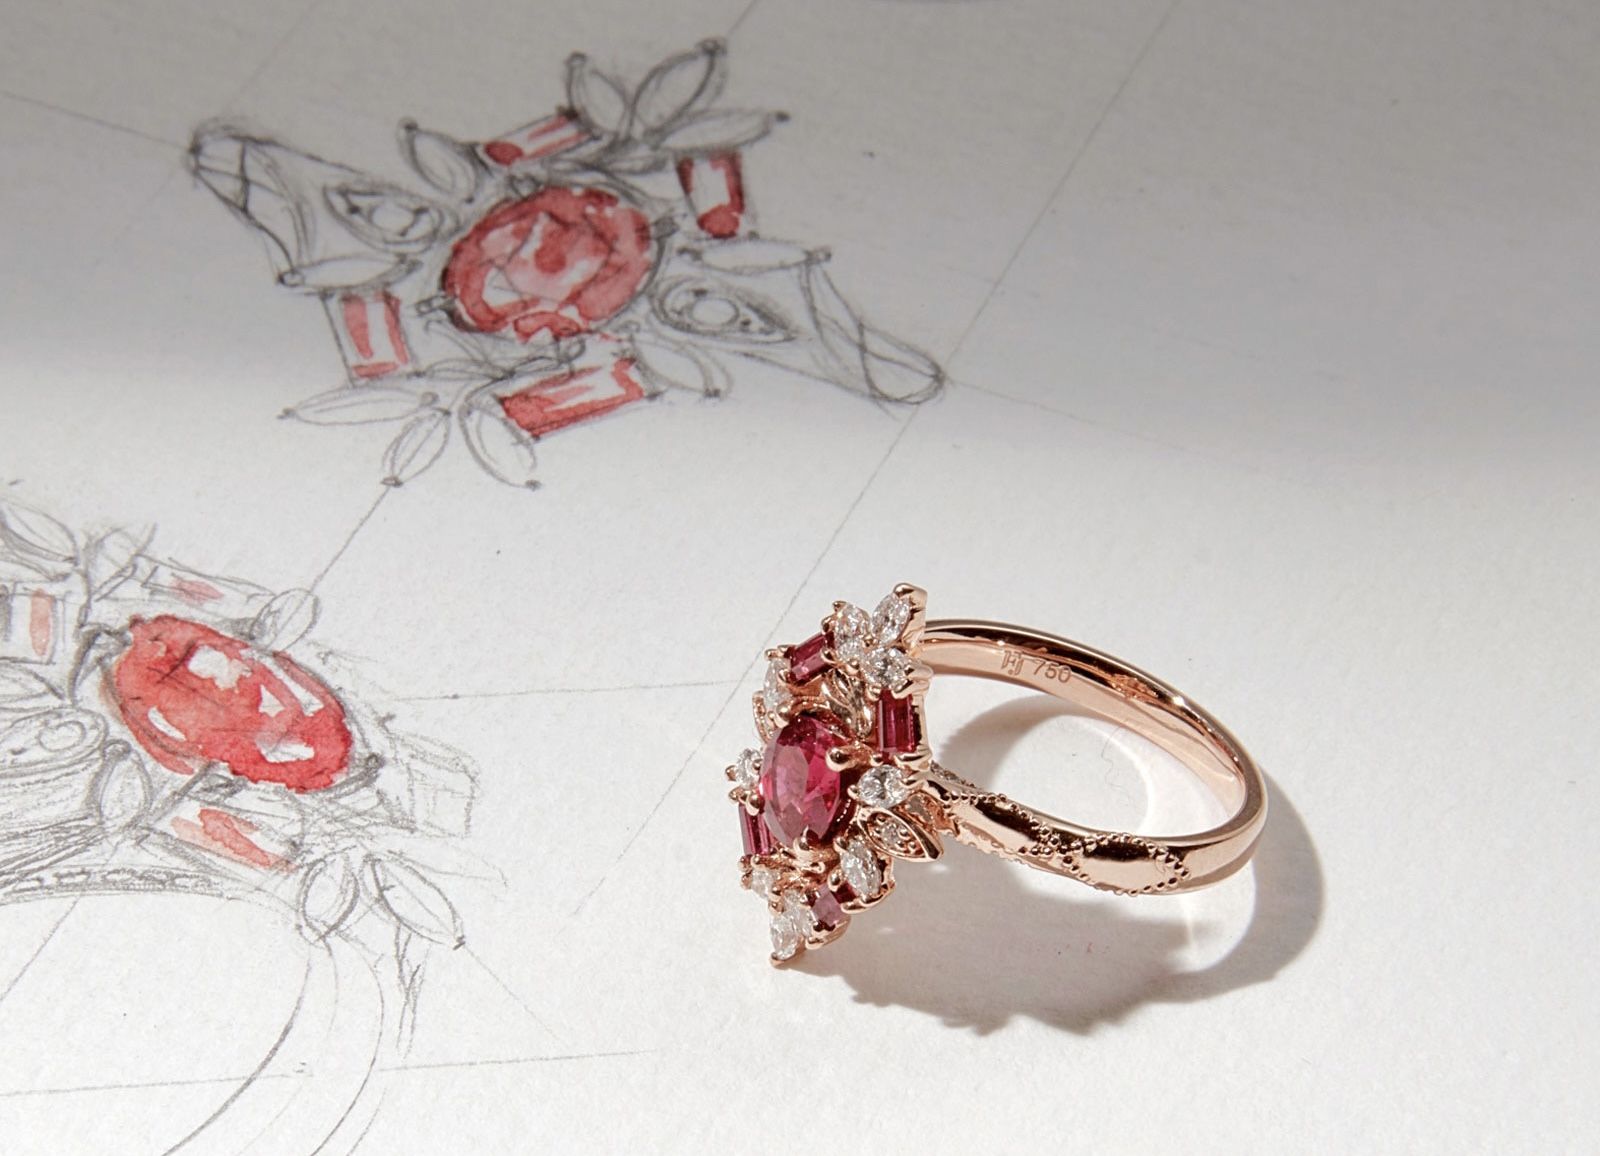 Designing the Healing Lotus ring by Faith Jewels